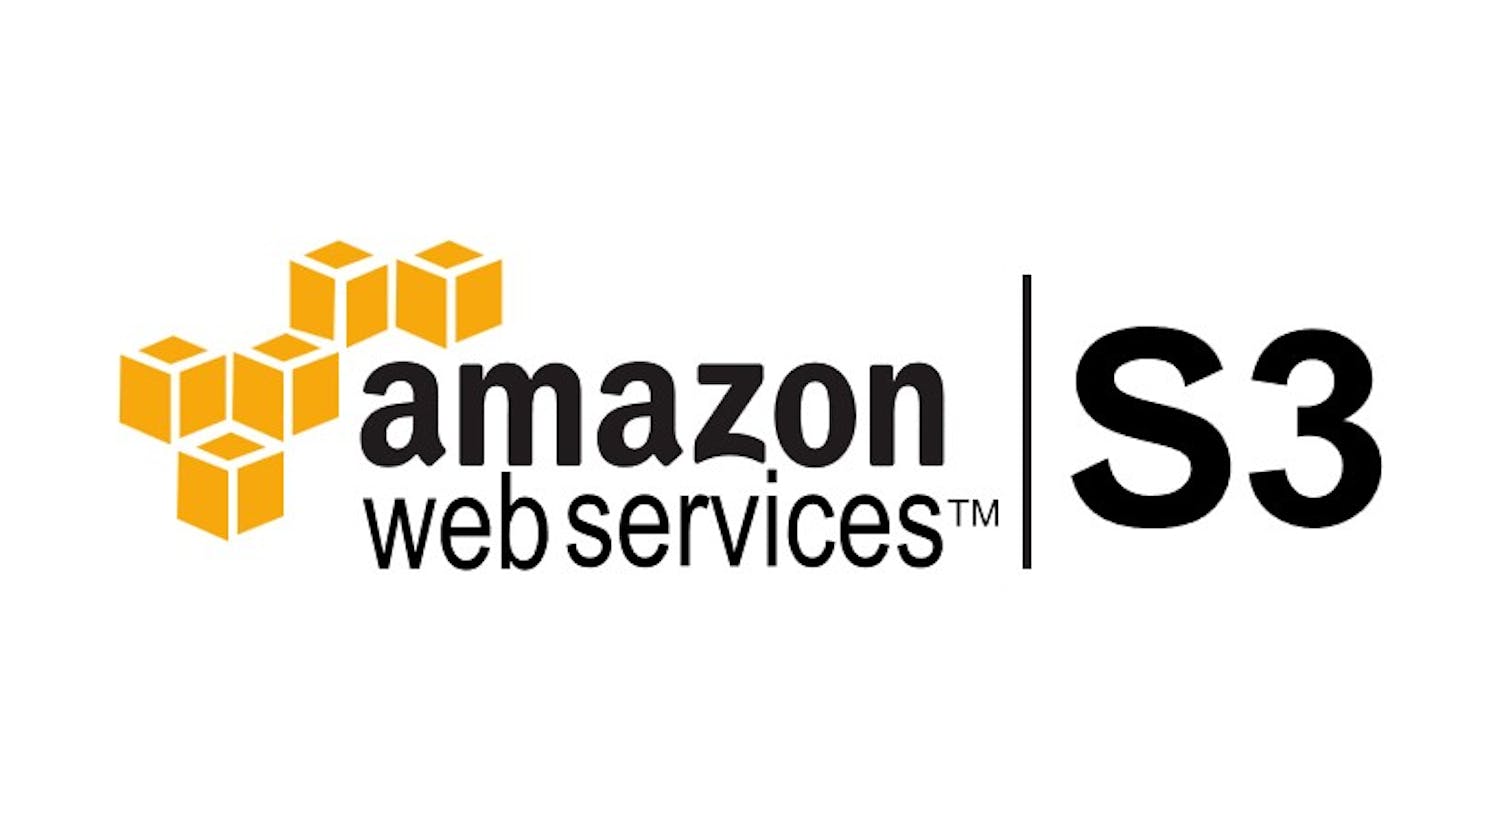 Becoming Proficient in Data Resilience: Practical Applications of S3 Replication Rules and Versioning on AWS S3